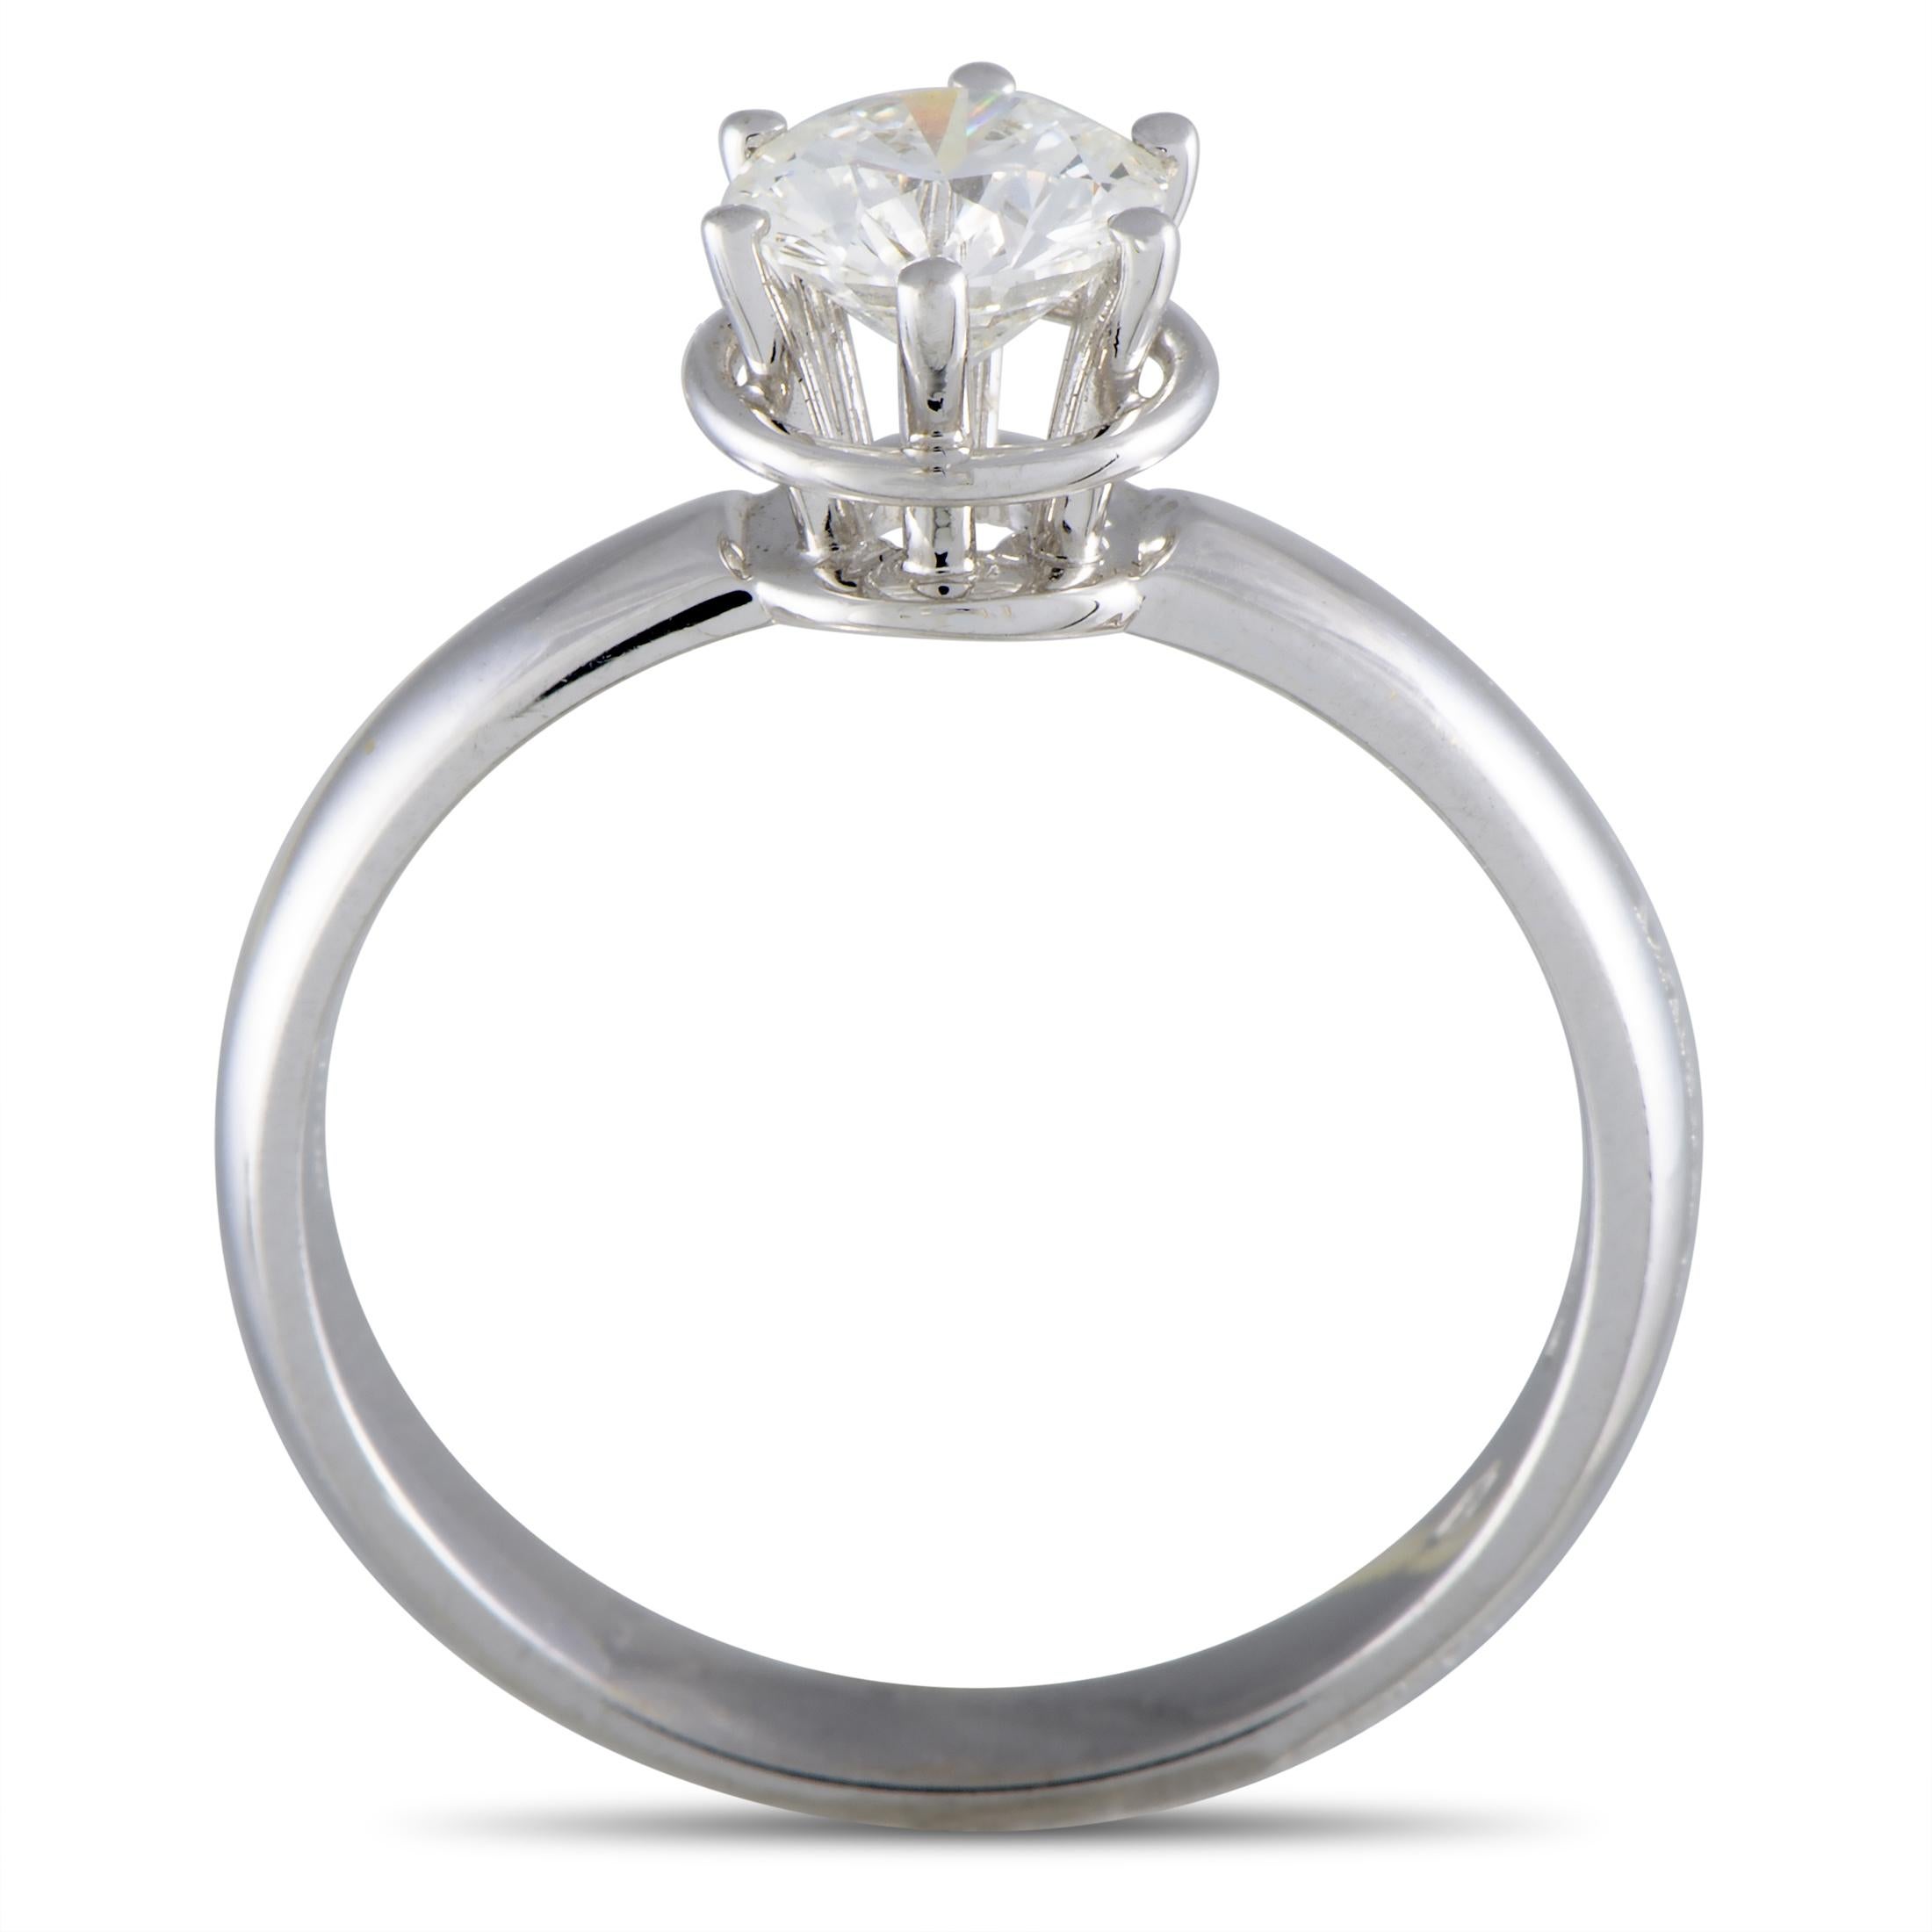 The Damiani “Queen” engagement ring is crafted from 18K white gold and weighs 3.9 grams. It has band thickness of 3 mm and top height of 6 mm, while top dimensions measure 7 by 7 mm. The ring is set with a diamond stone that weighs 0.75 carats.
 
